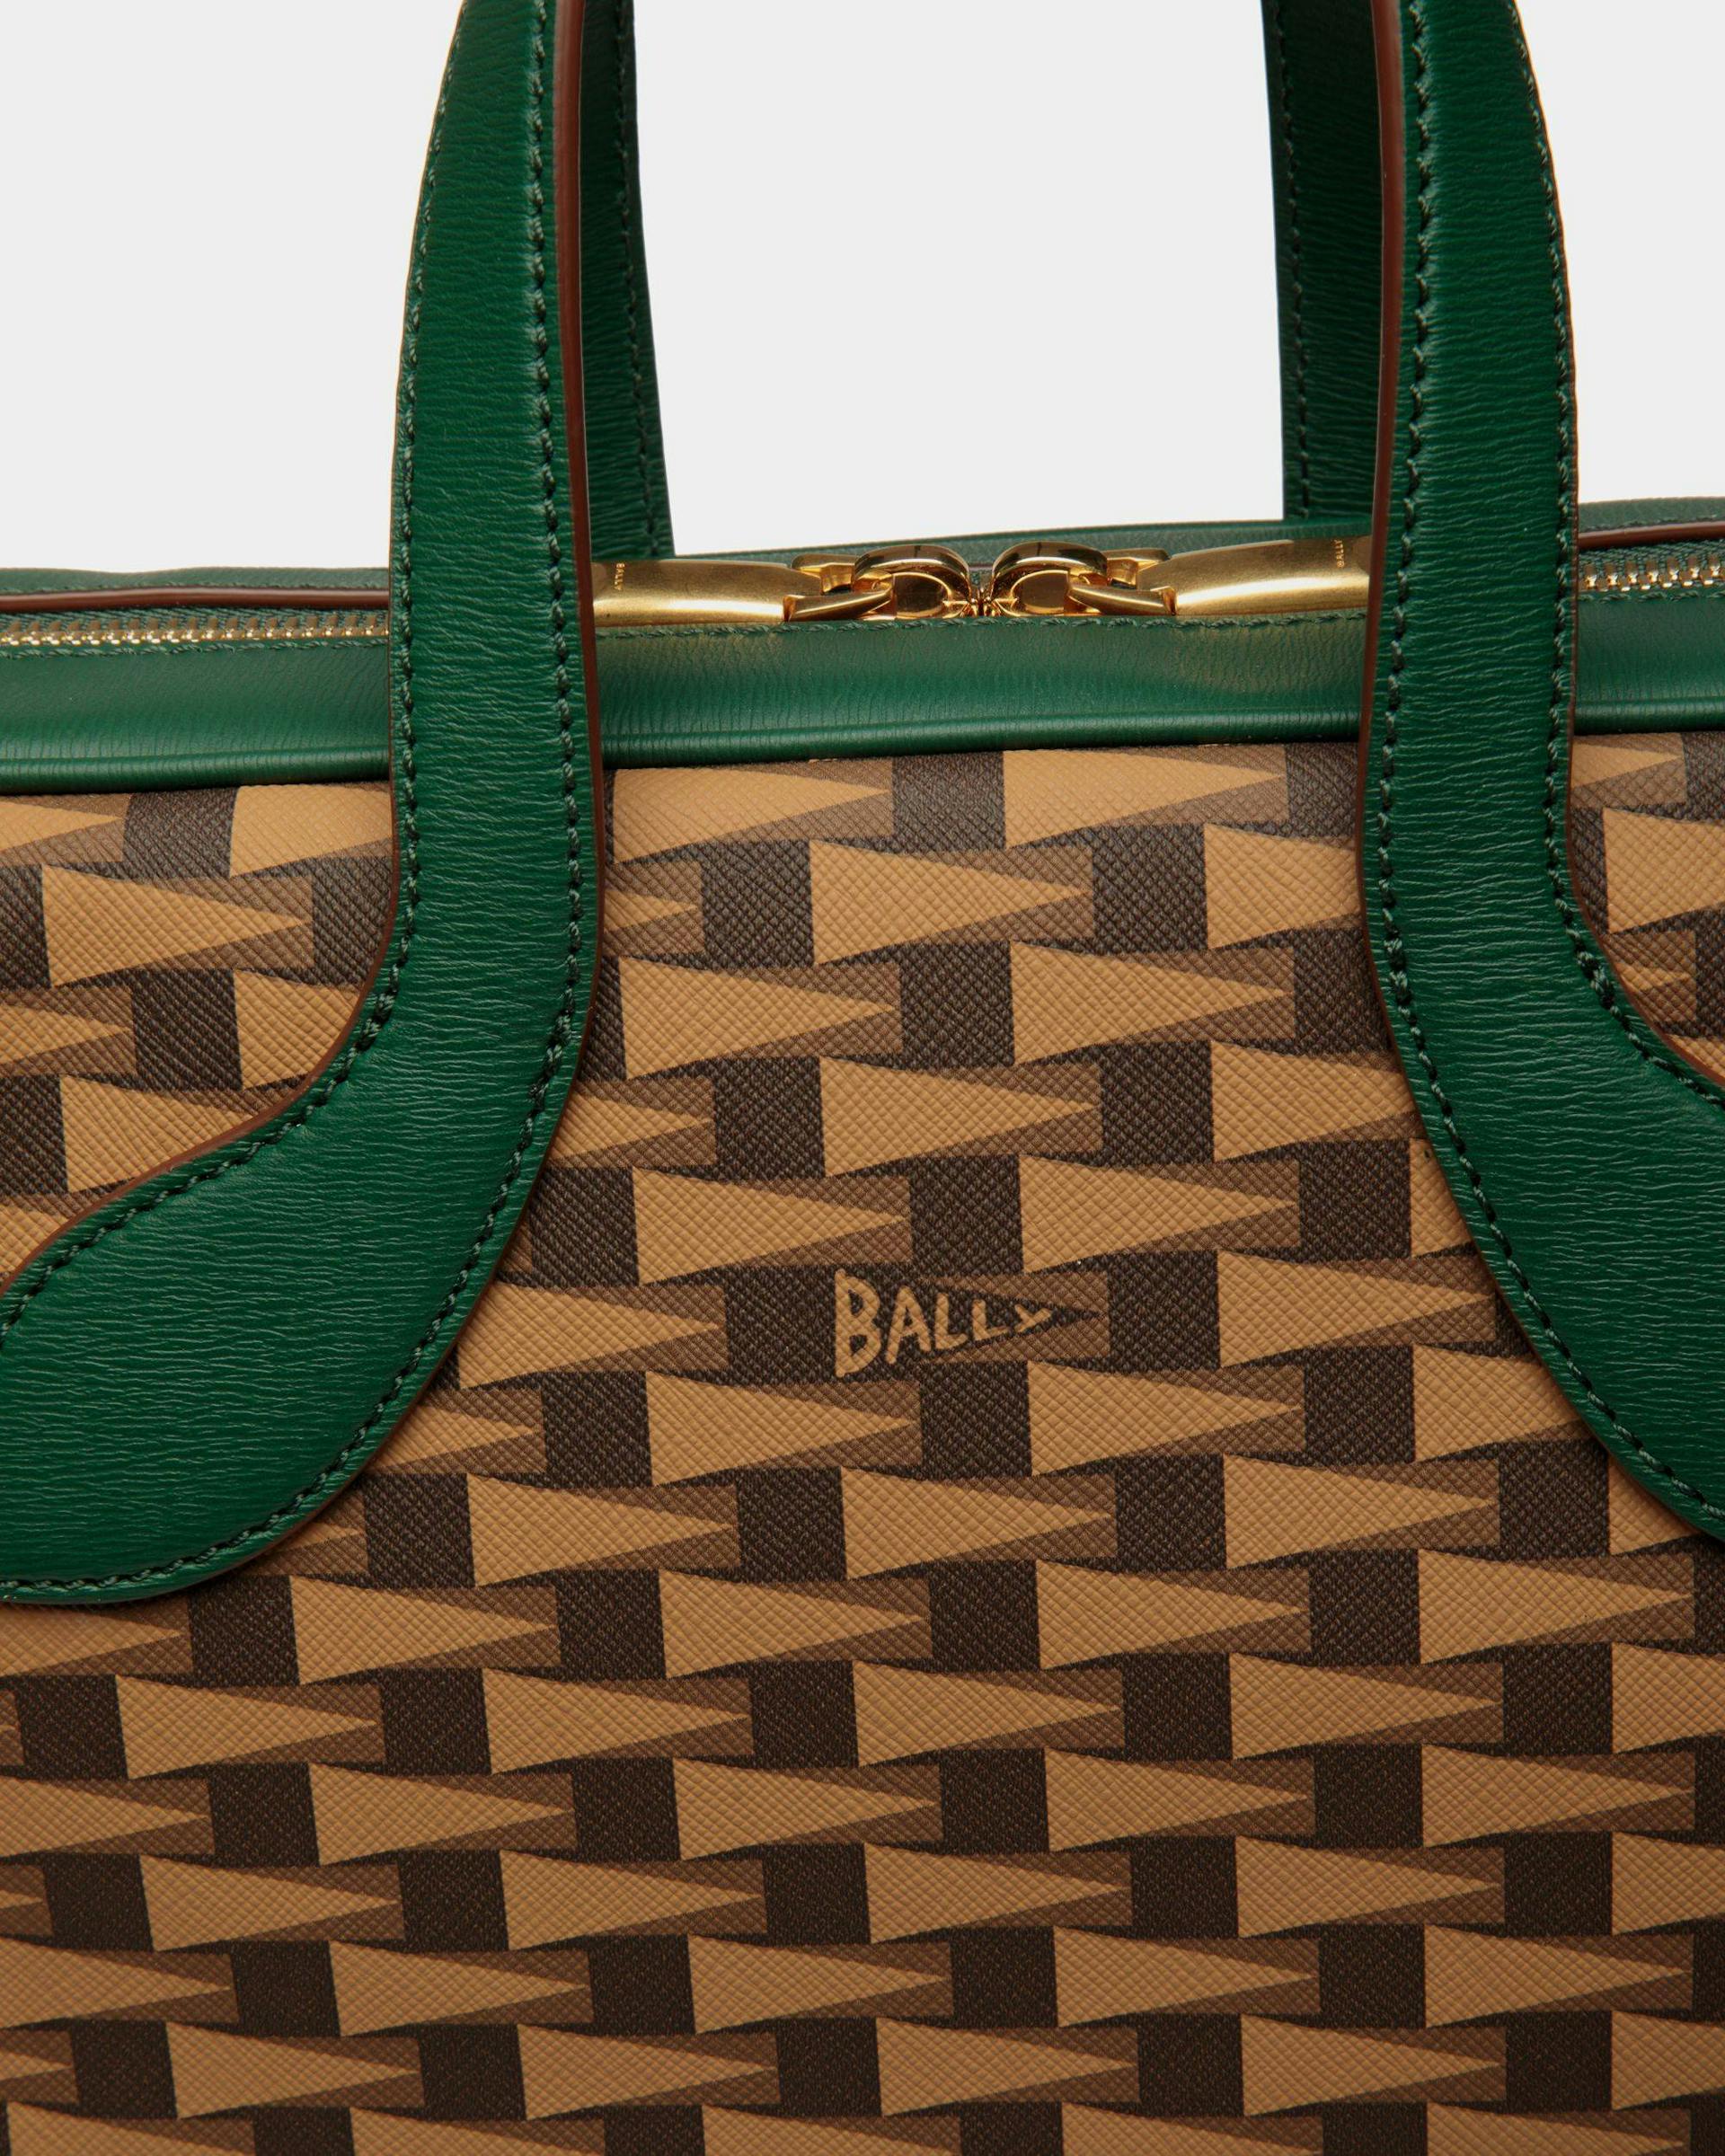 Men's Pennant Briefcase In Desert TPU And Kelly Green Leather | Bally | Still Life Detail